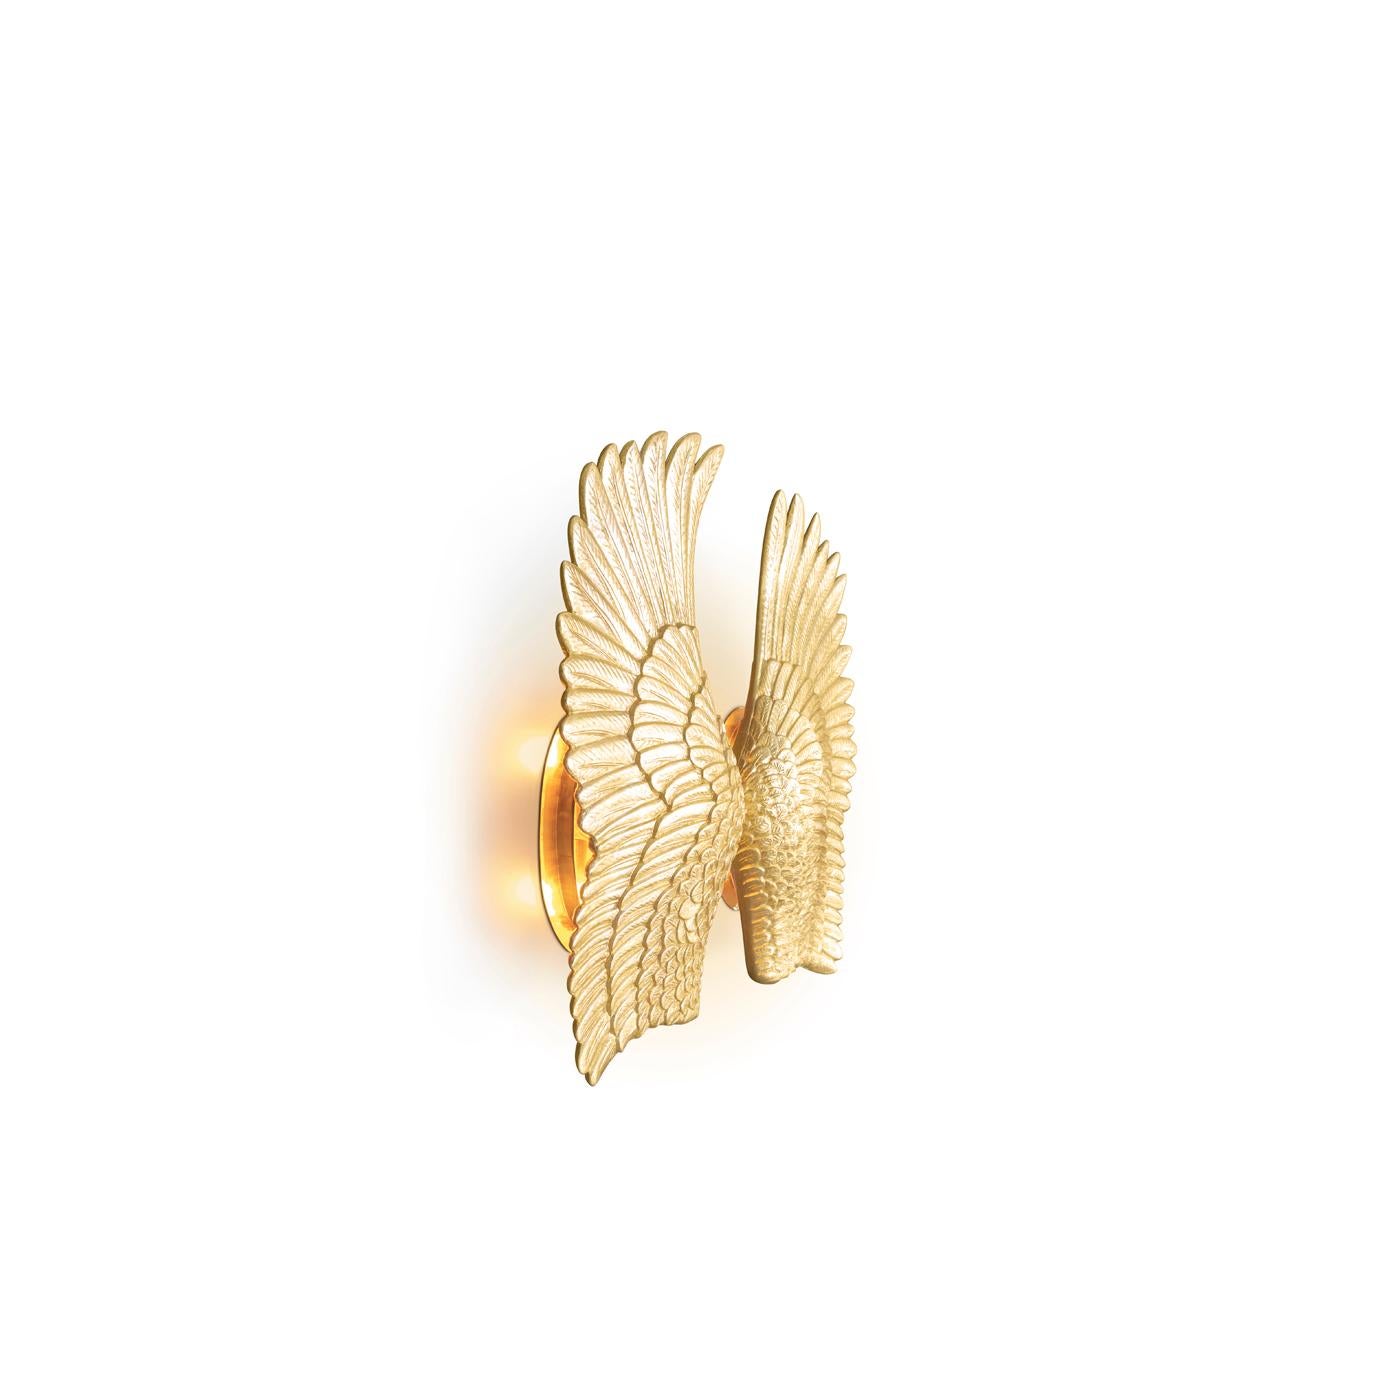 “Your wings already exist, all you have to do is fly!” Bring strength, freedom, love and protective power to your interior with the charmingly angelic Pluma sconce.